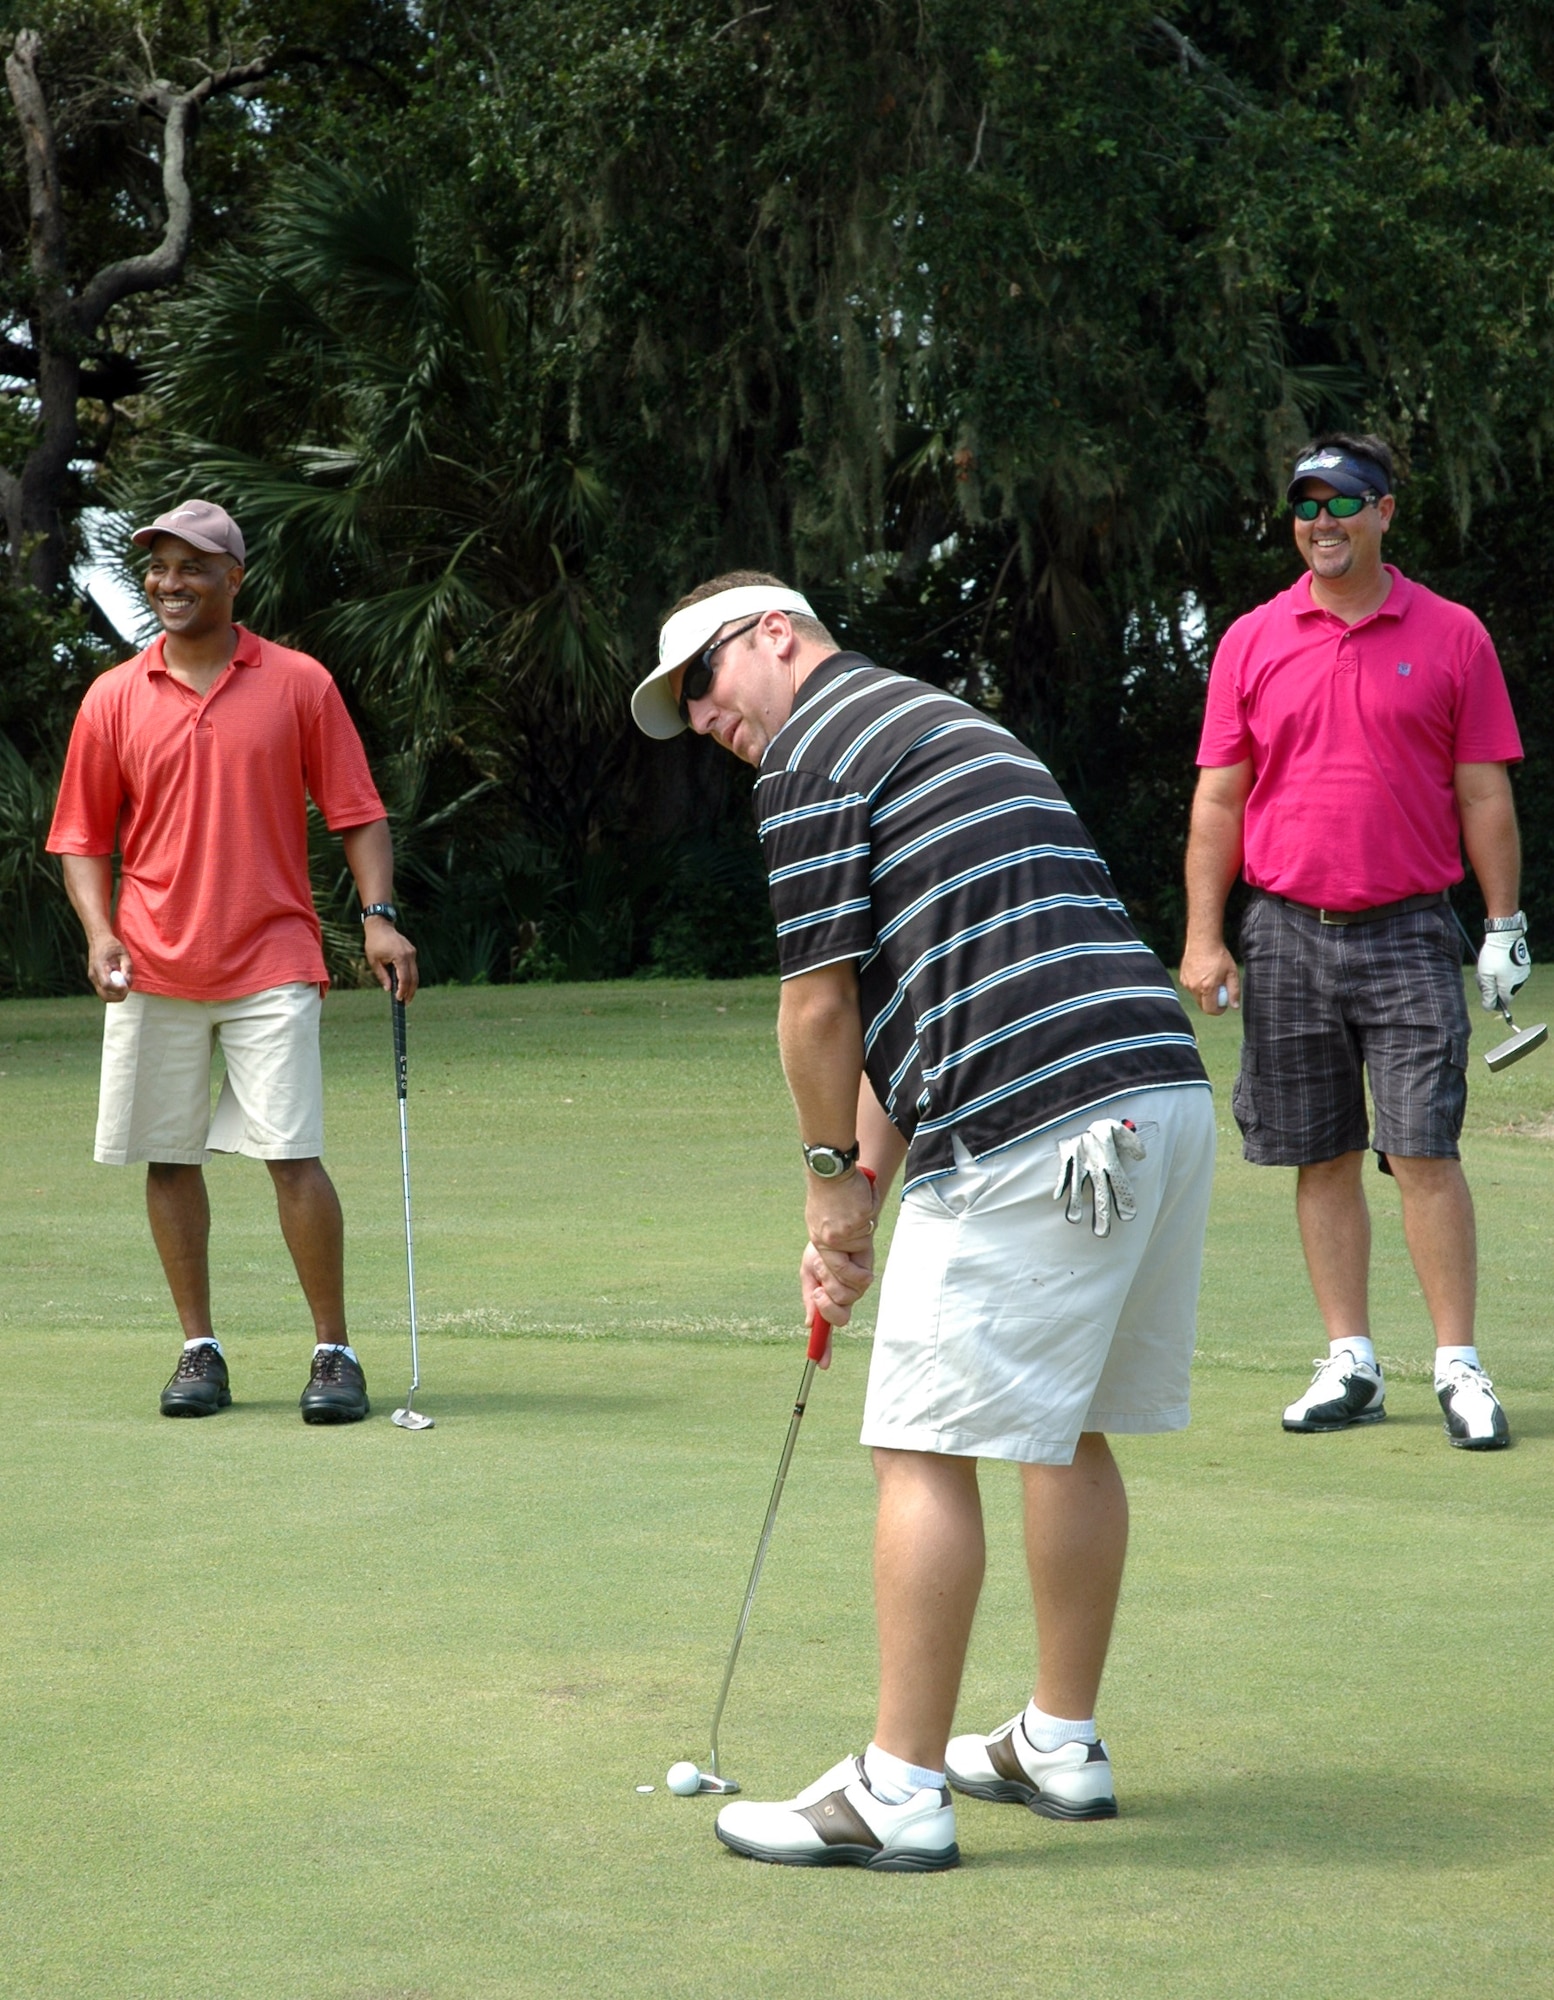 TYNDALL AIR FORCE BASE, Fla -- Col. Timothy Blount, Director of Communications. 1st Air Force, Major Chad Bubanas, 18th Flight Test Squadron, and James Clark enjoy a round a golf during the Military Affairs CommitteeGolf Tournament Sept. 11 at Pelican Point Golf Course, Tyndall Air Force Base. All 18 holes was sponsored by different orginizations around Bay County. (U.S. Air Force photo by Airman 1st Class Rachelle Elsea)